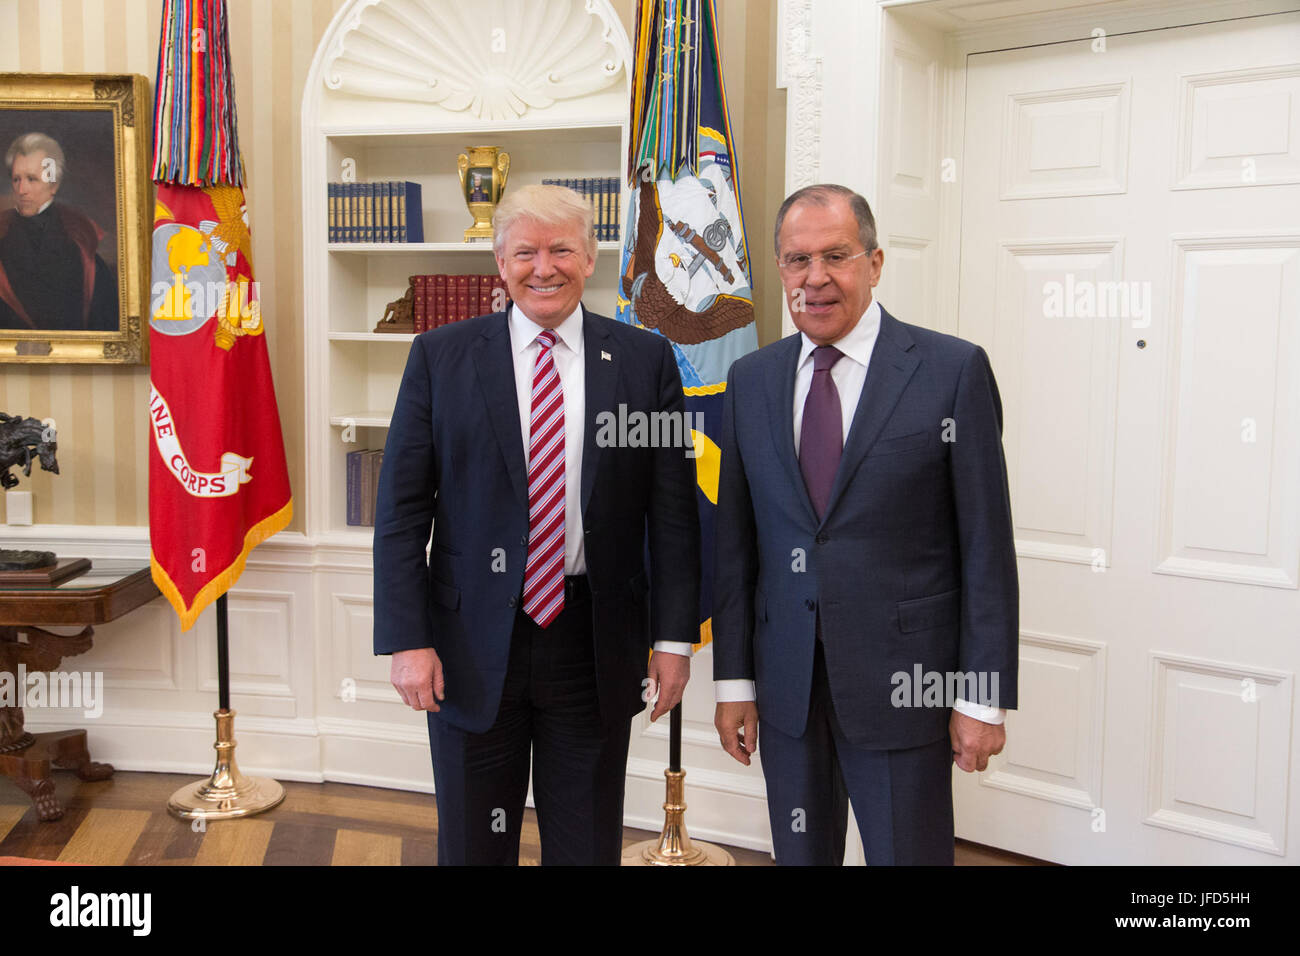 President Donald Trump speaks with Russian Foreign Minister Sergey Lavrov in the Oval Office, Wednesday, May 10, 2017, at the White House in Washington, D.C. (Official White House Photo by Shealah Craighead) Stock Photo